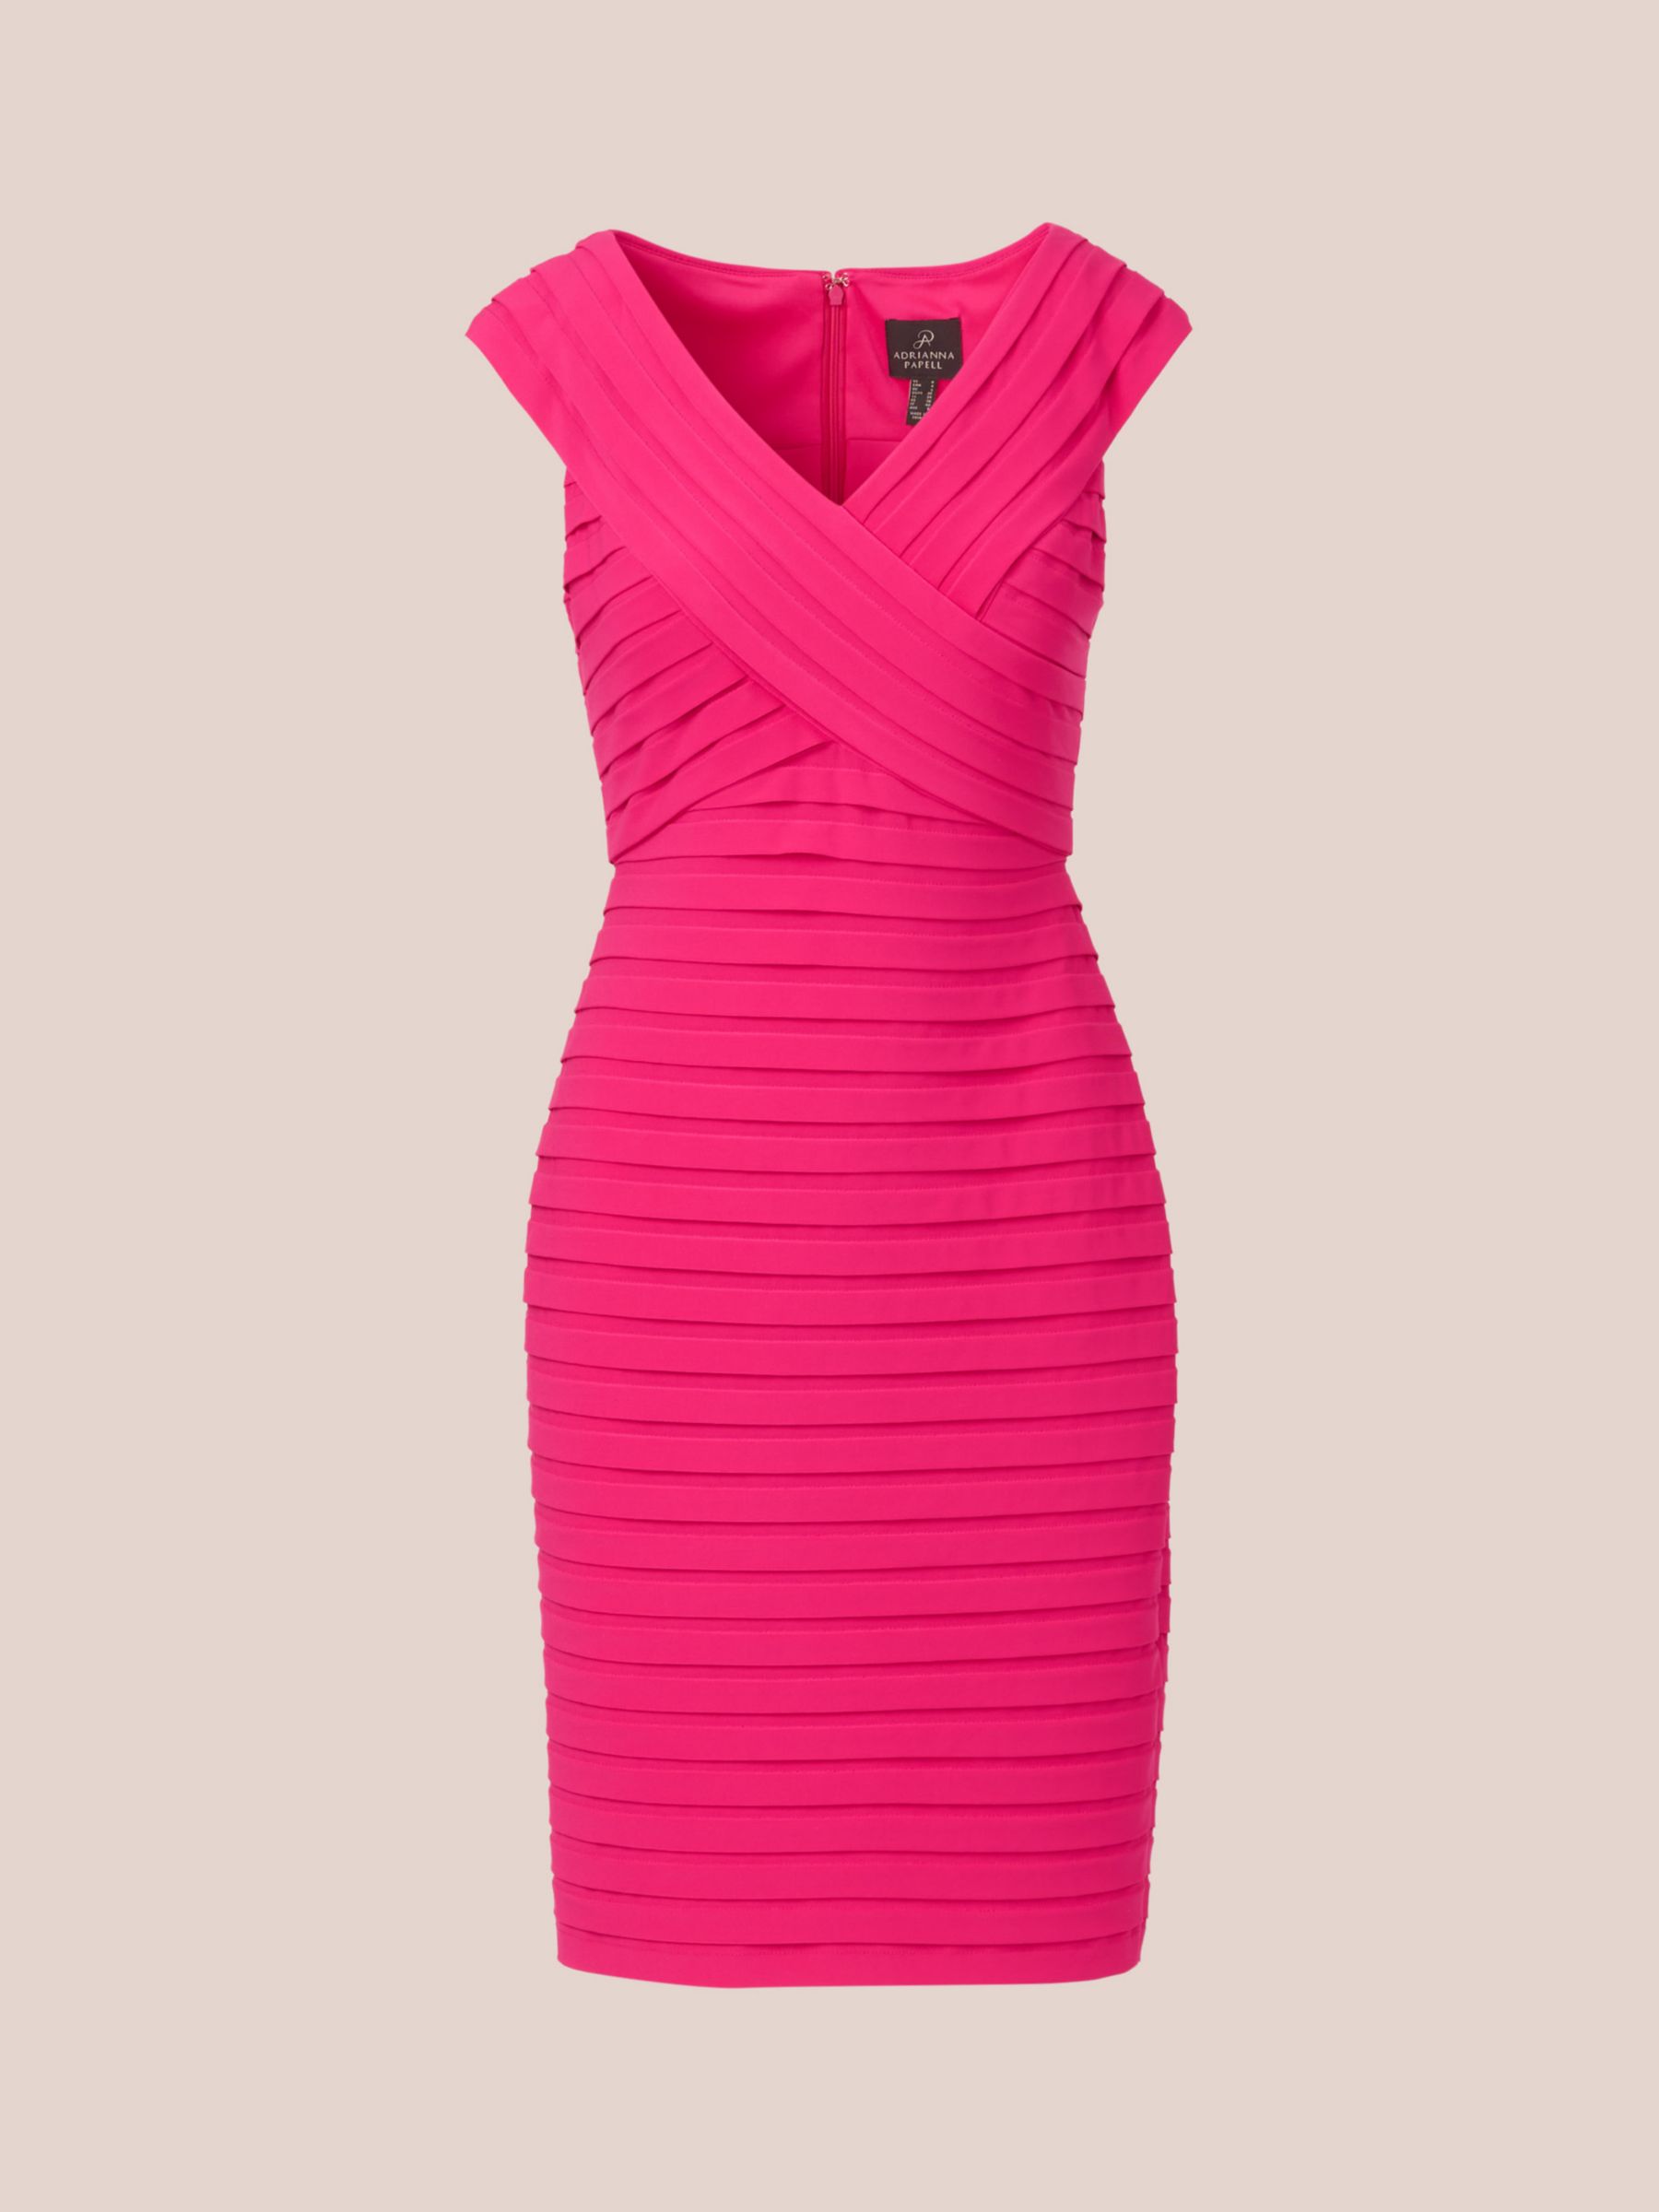 Adrianna Papell Banded Jersey Dress, Electric Pink, 6